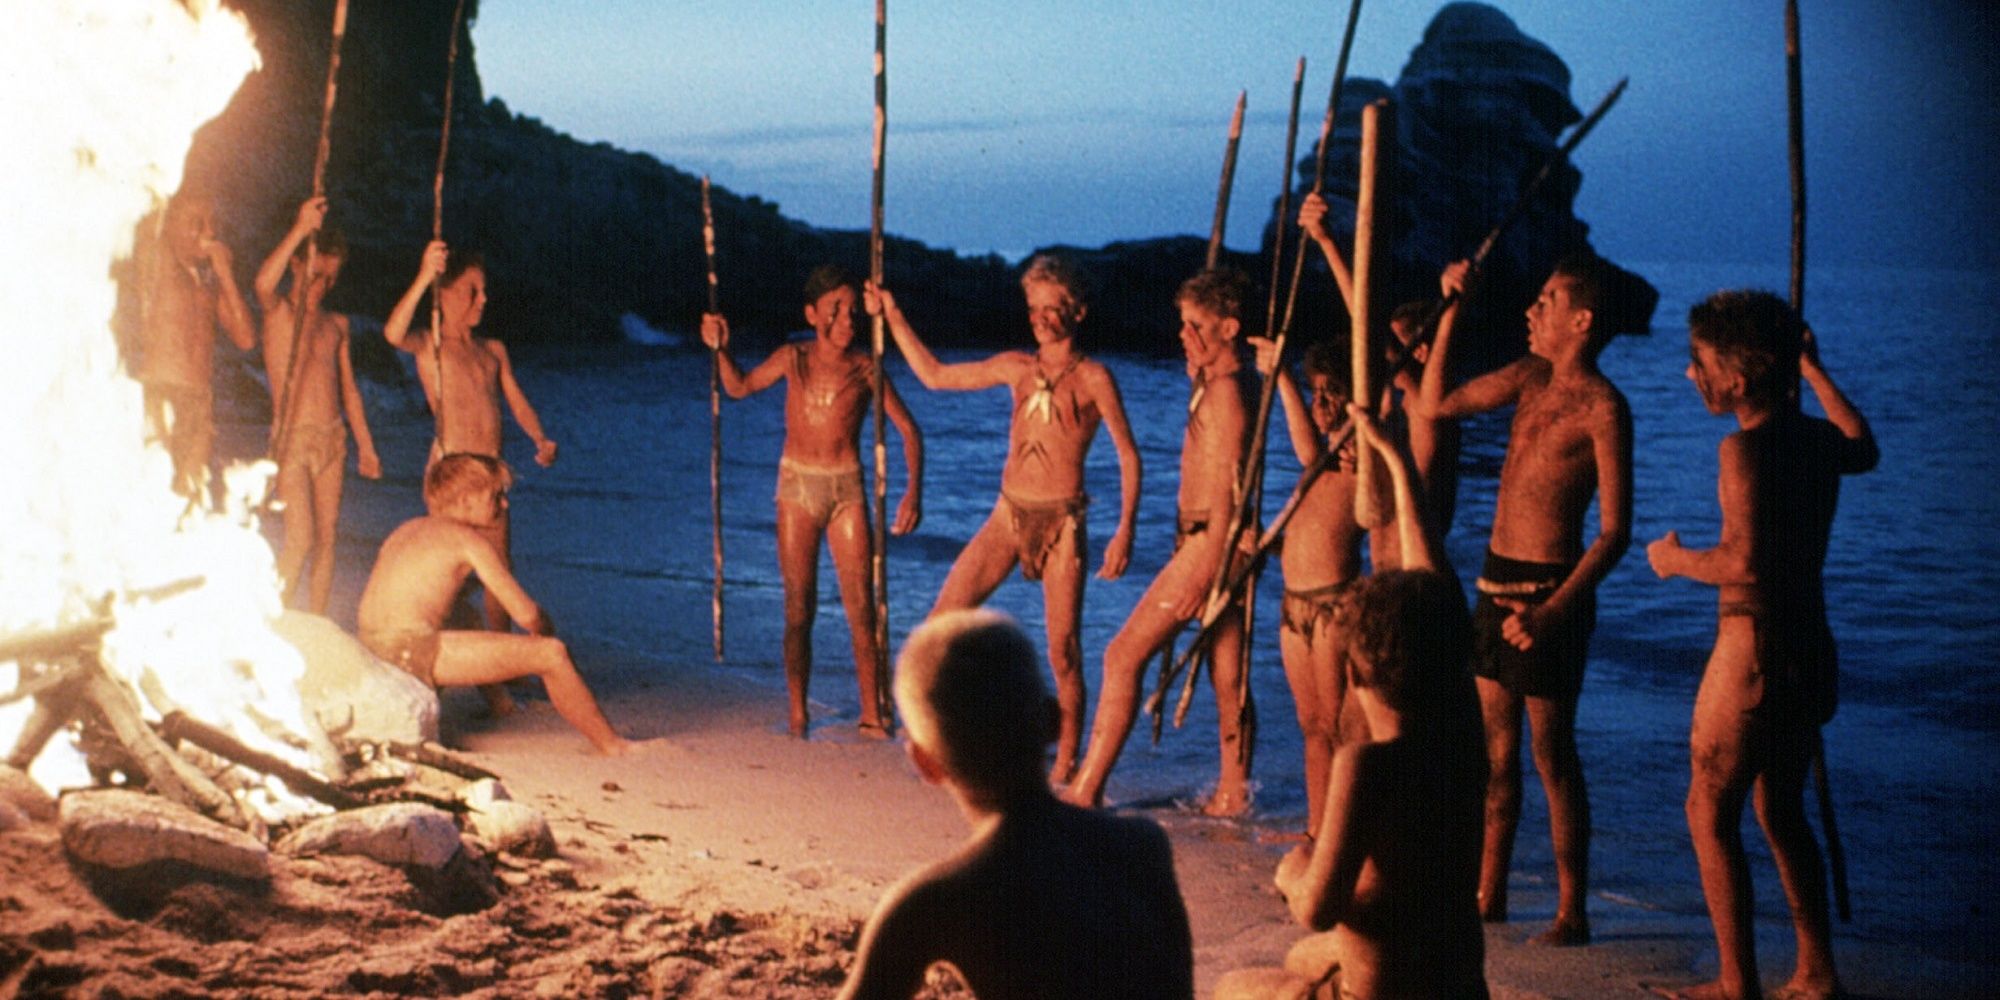 The schoolboys around a bonfire in the Lord of Flies.